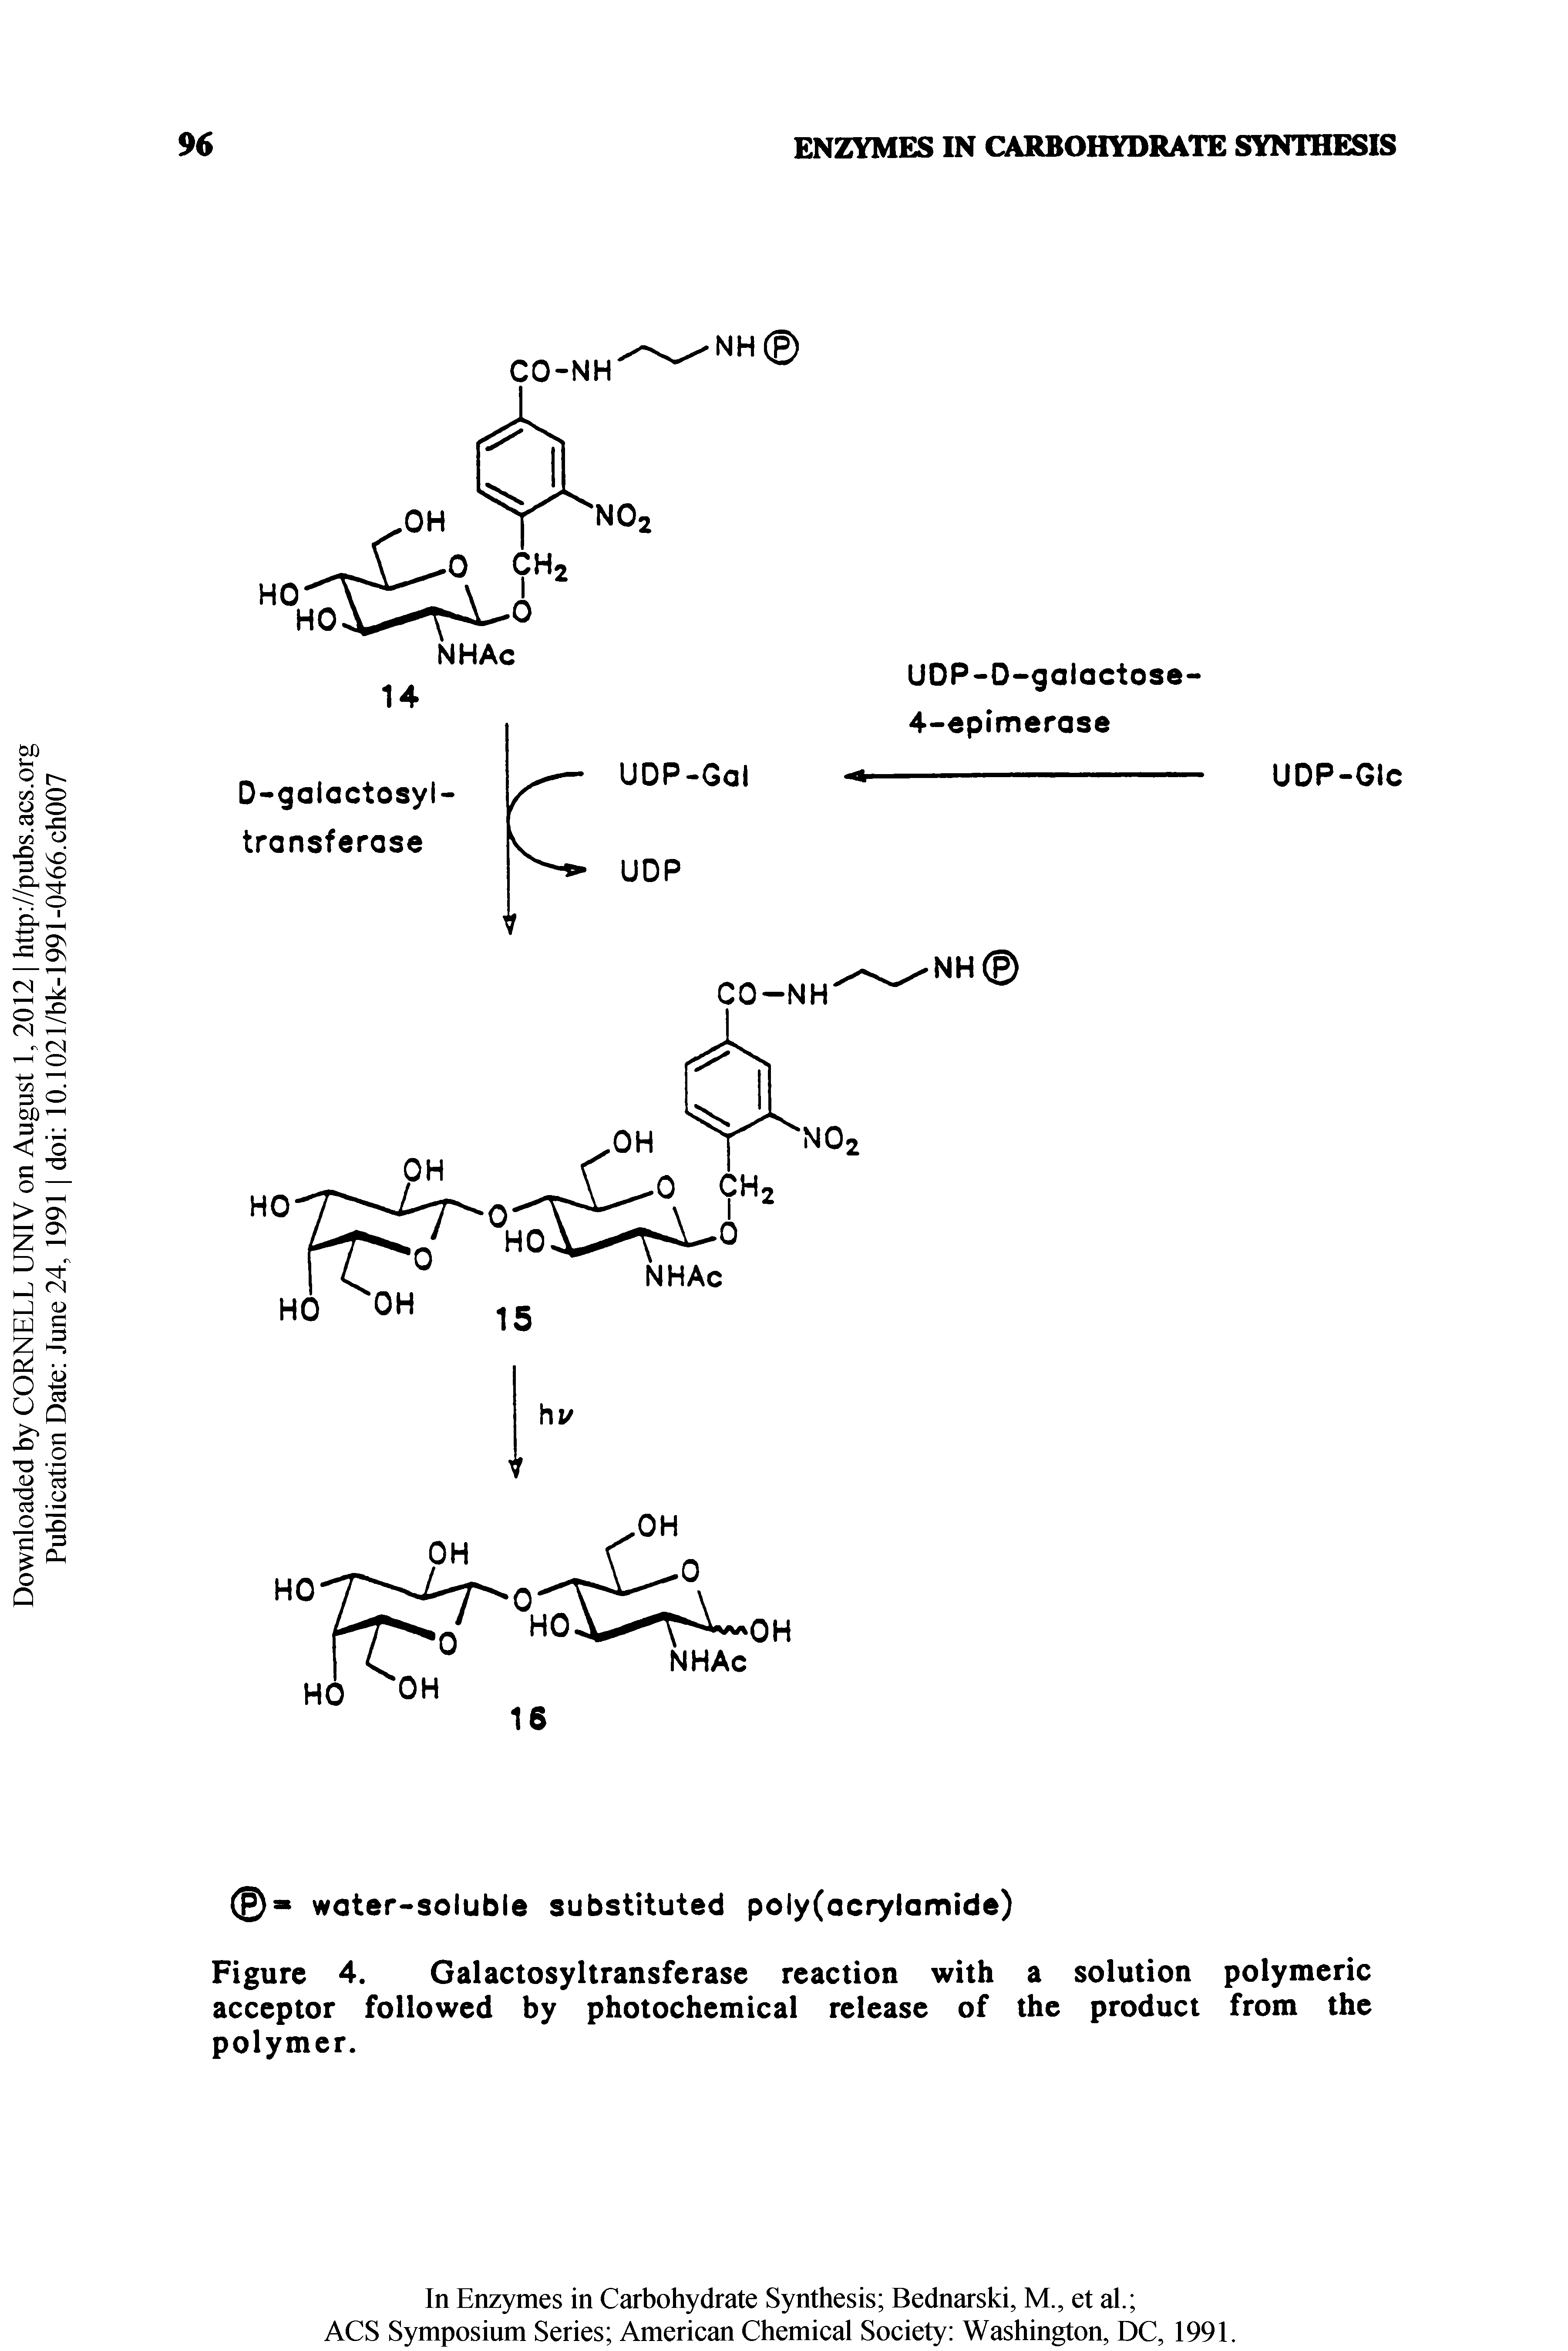 Figure 4. Galactosyltransferase reaction with a solution polymeric acceptor followed by photochemical release of the product from the polymer.